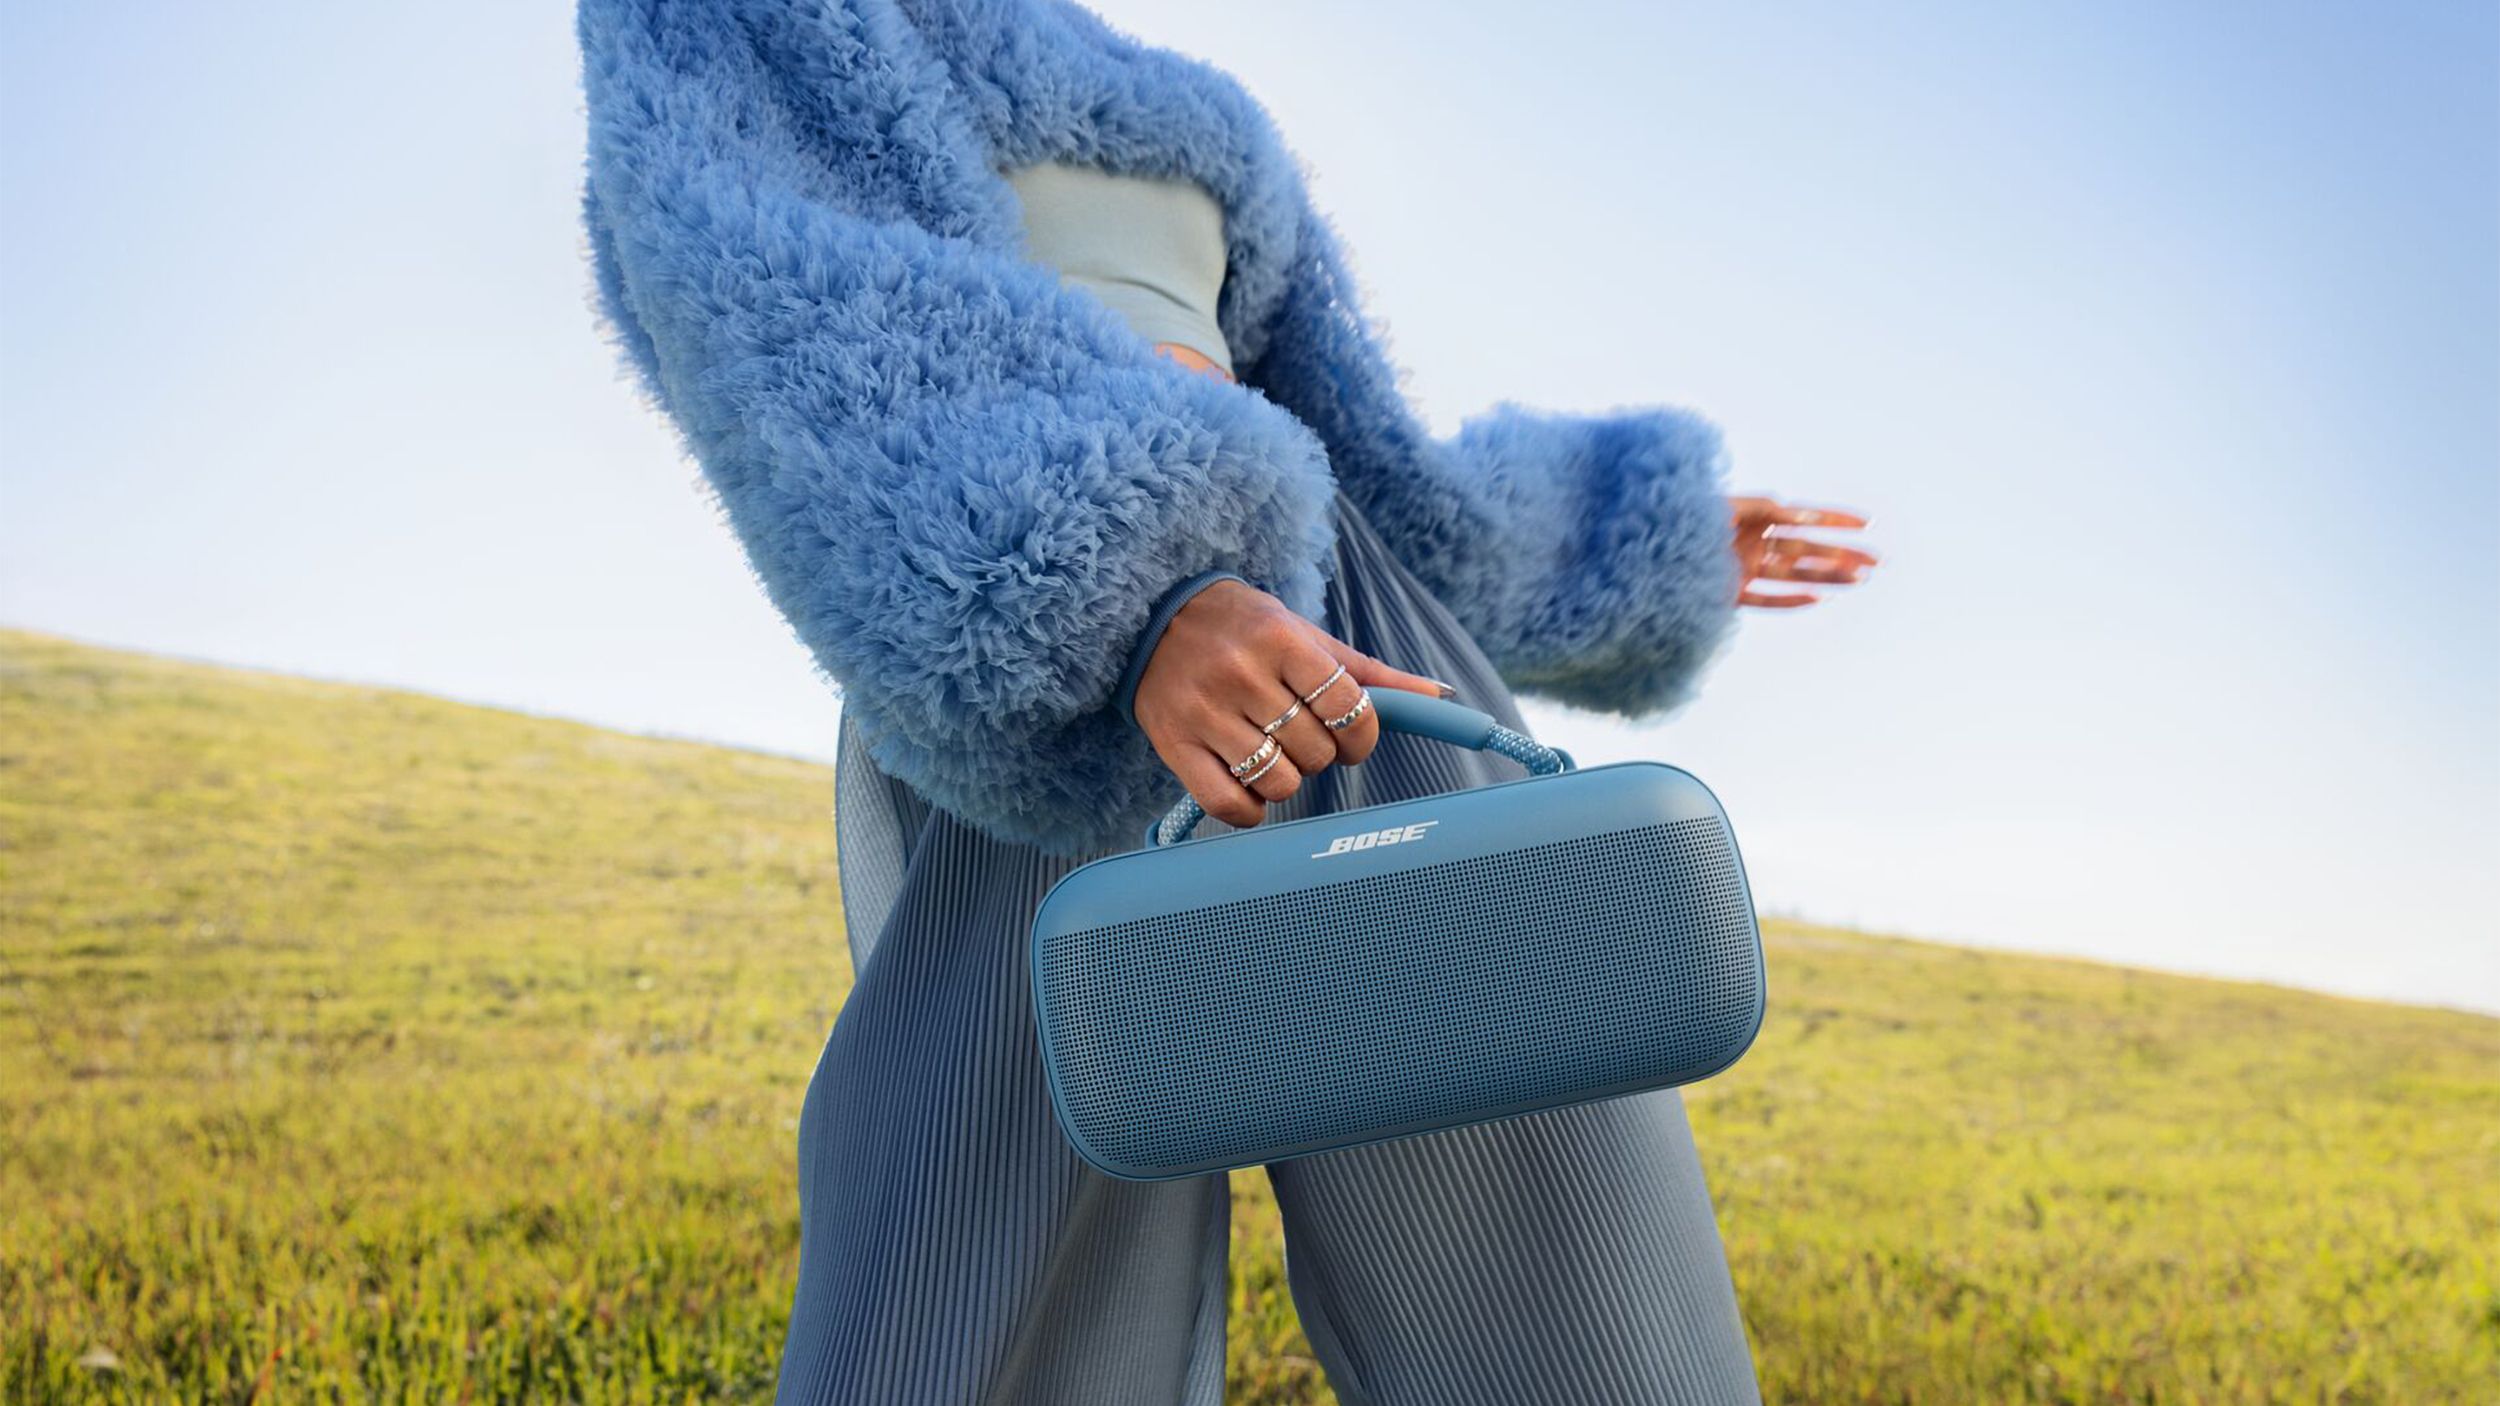 A person wearing a blue fuzzy top holds the blue Bose SoundLink Max speaker in front of a grassy hill and blue sky.